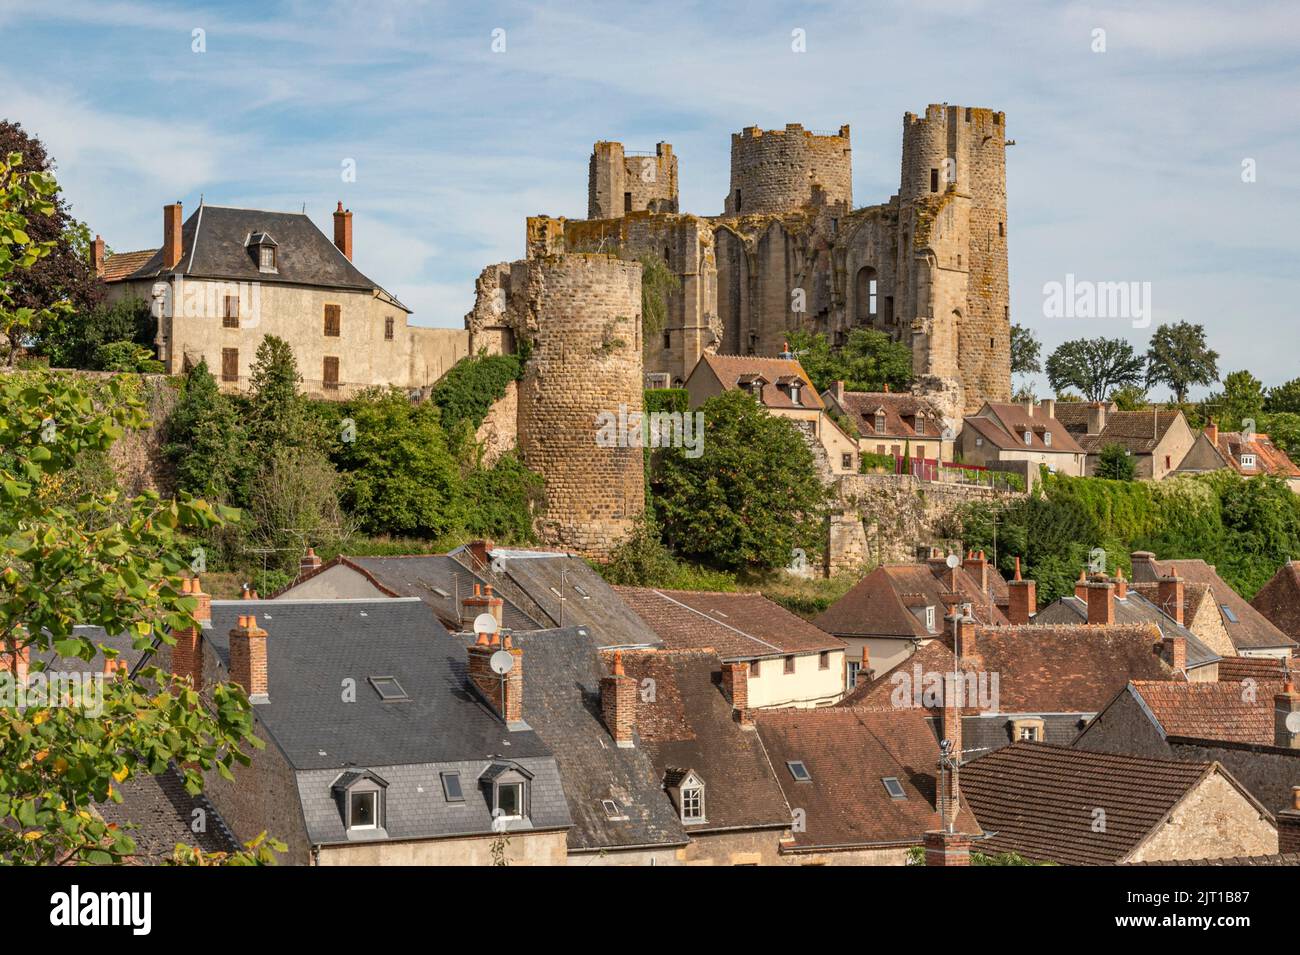 Once an impressive fortress with 15 towers, only 3 towers survived and today dominate the skyline of Bourbon-l'Archambault in Allier, France Stock Photo